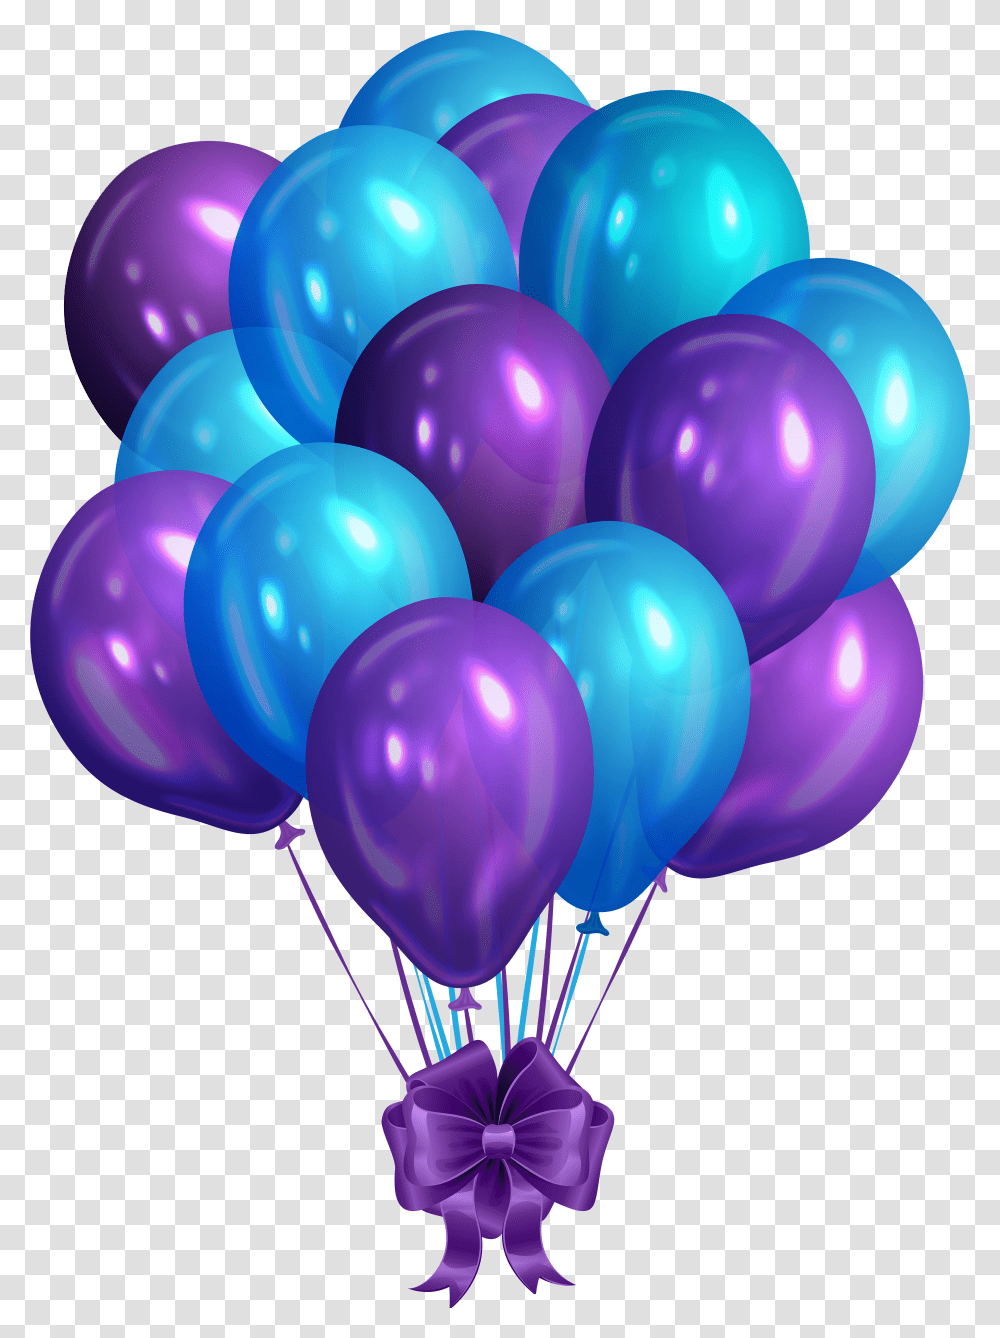 Blue Bunch Of Balloons Clip Art Blue And Purple Balloons Transparent Png